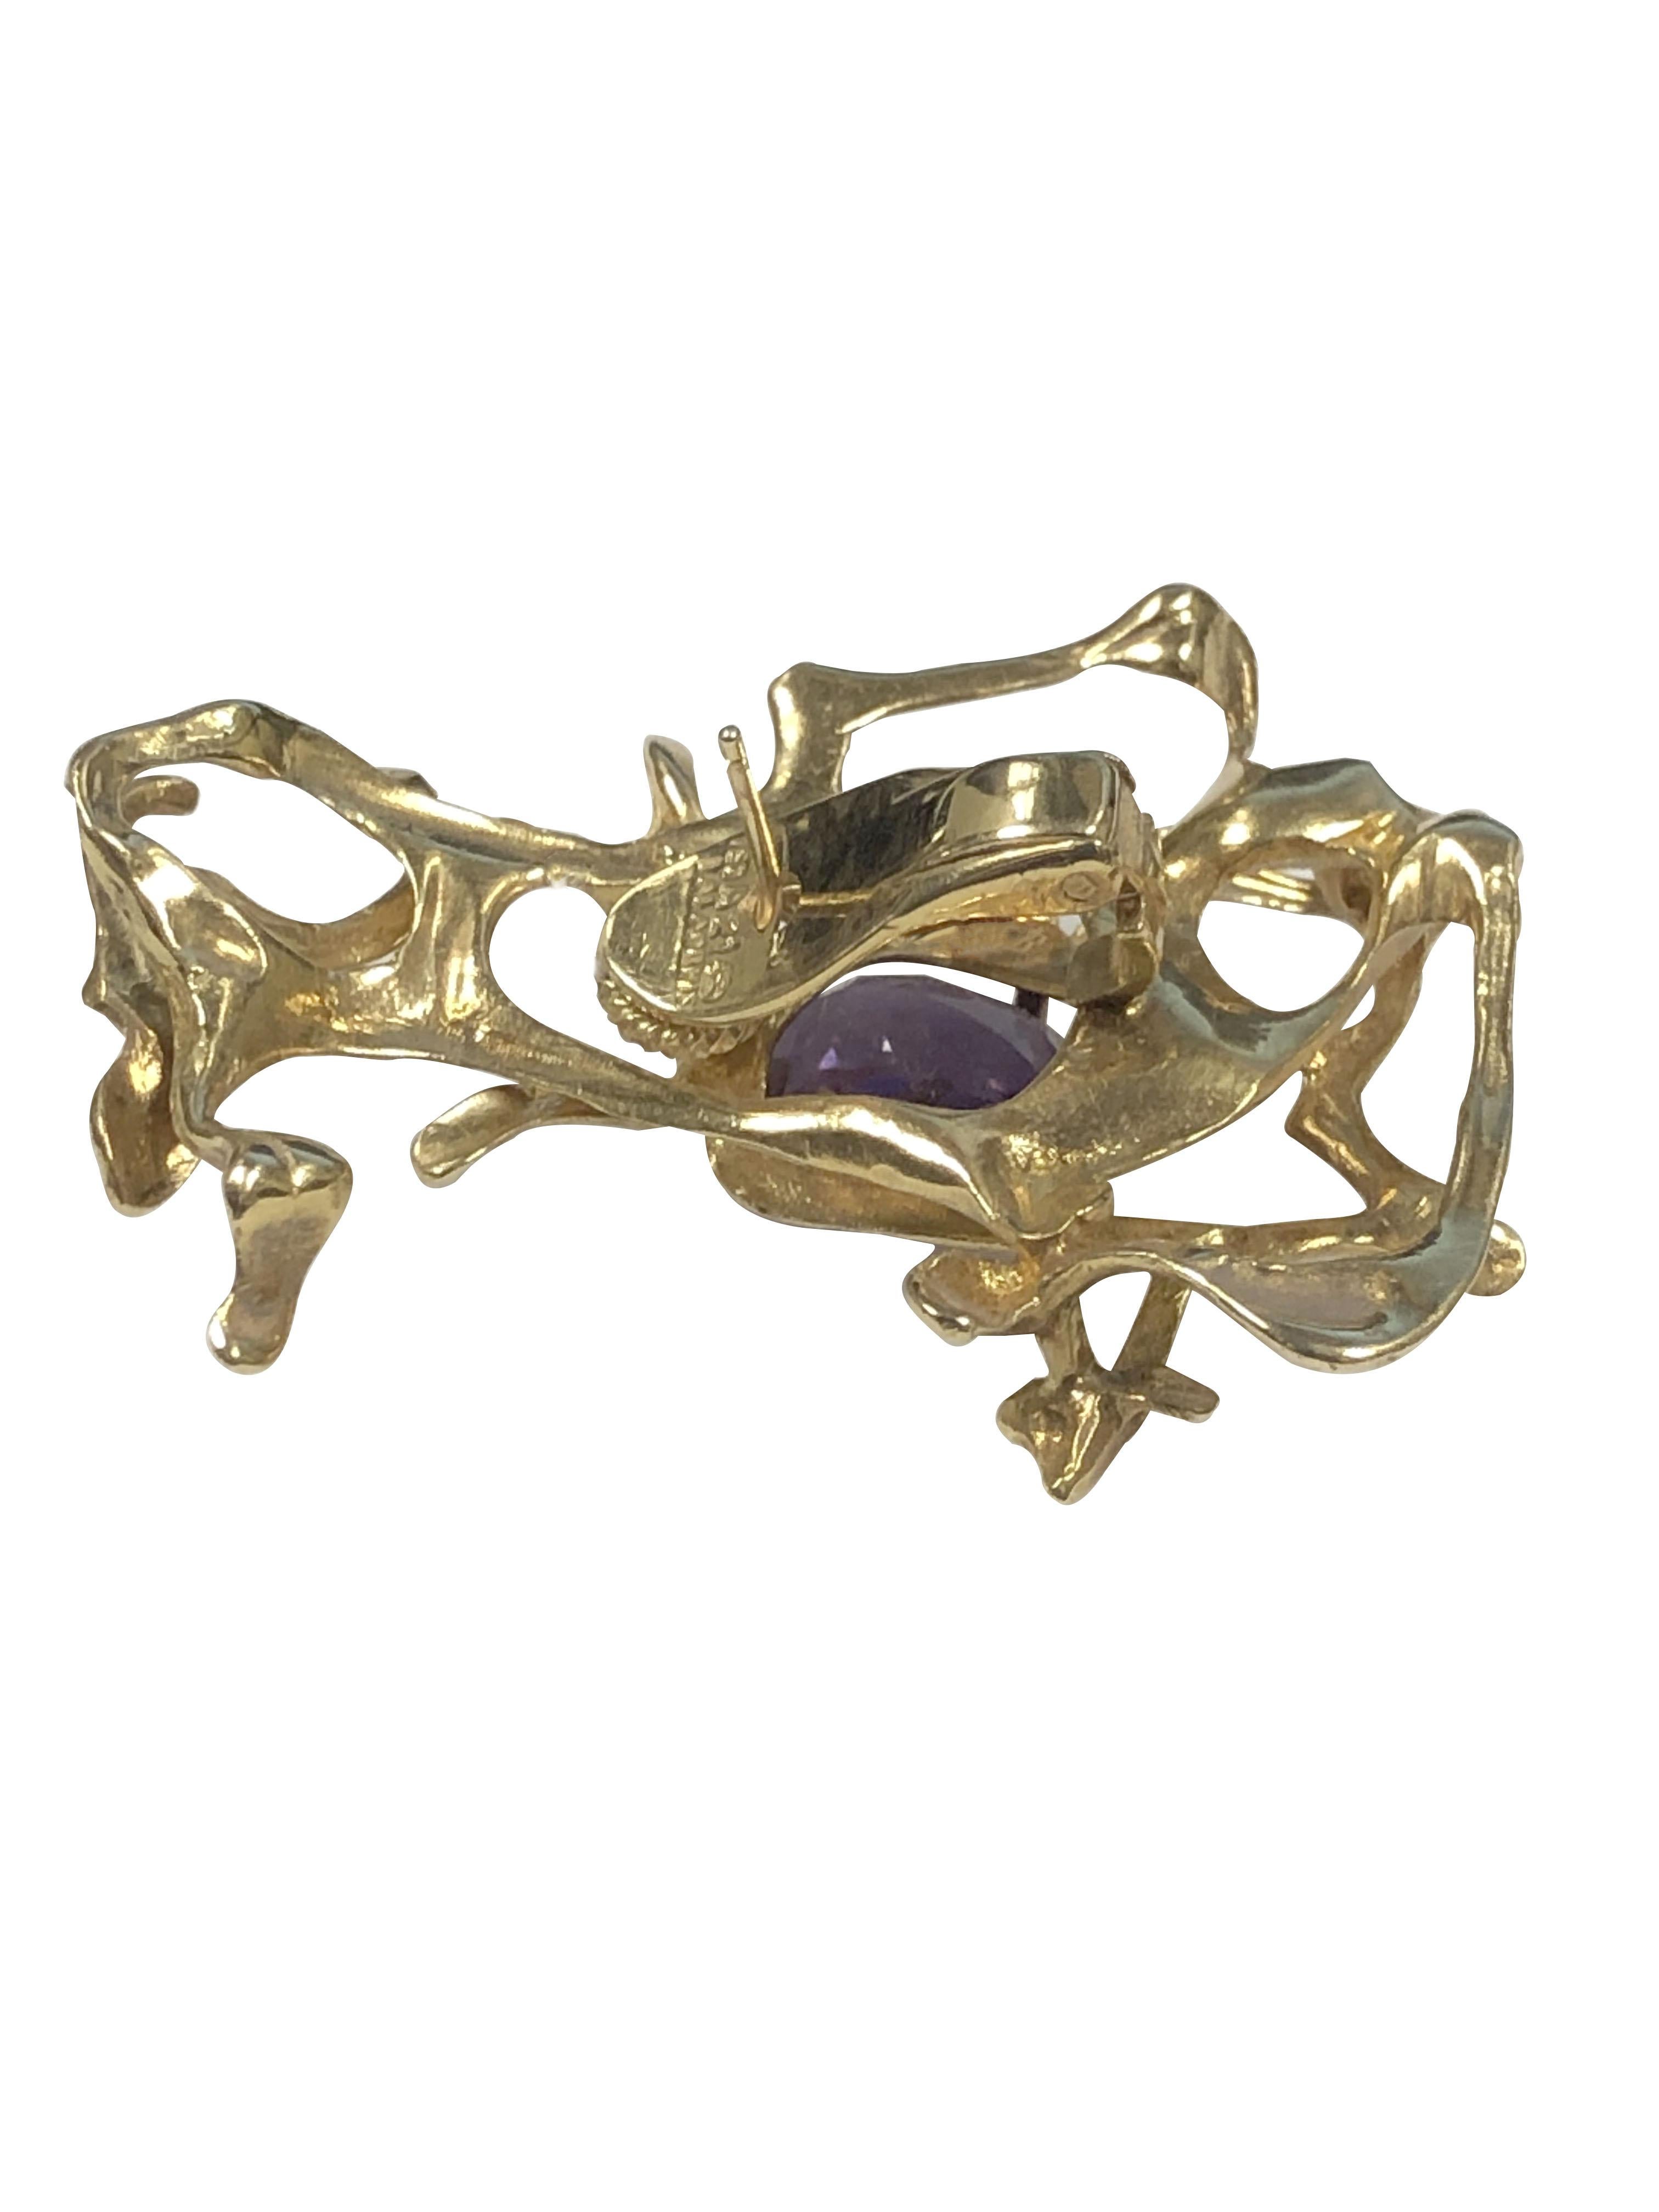 Circa 1970 Ilias LaLaounis Brutalist Free Form 18k yellow Gold Earrings, measuring 1 3/4 inches in length 1 1/8 inches wide and weighing 33.9 Grams. Centrally set with an oval Amethyst each approximately 4 Carats. Clip backs with a post, very